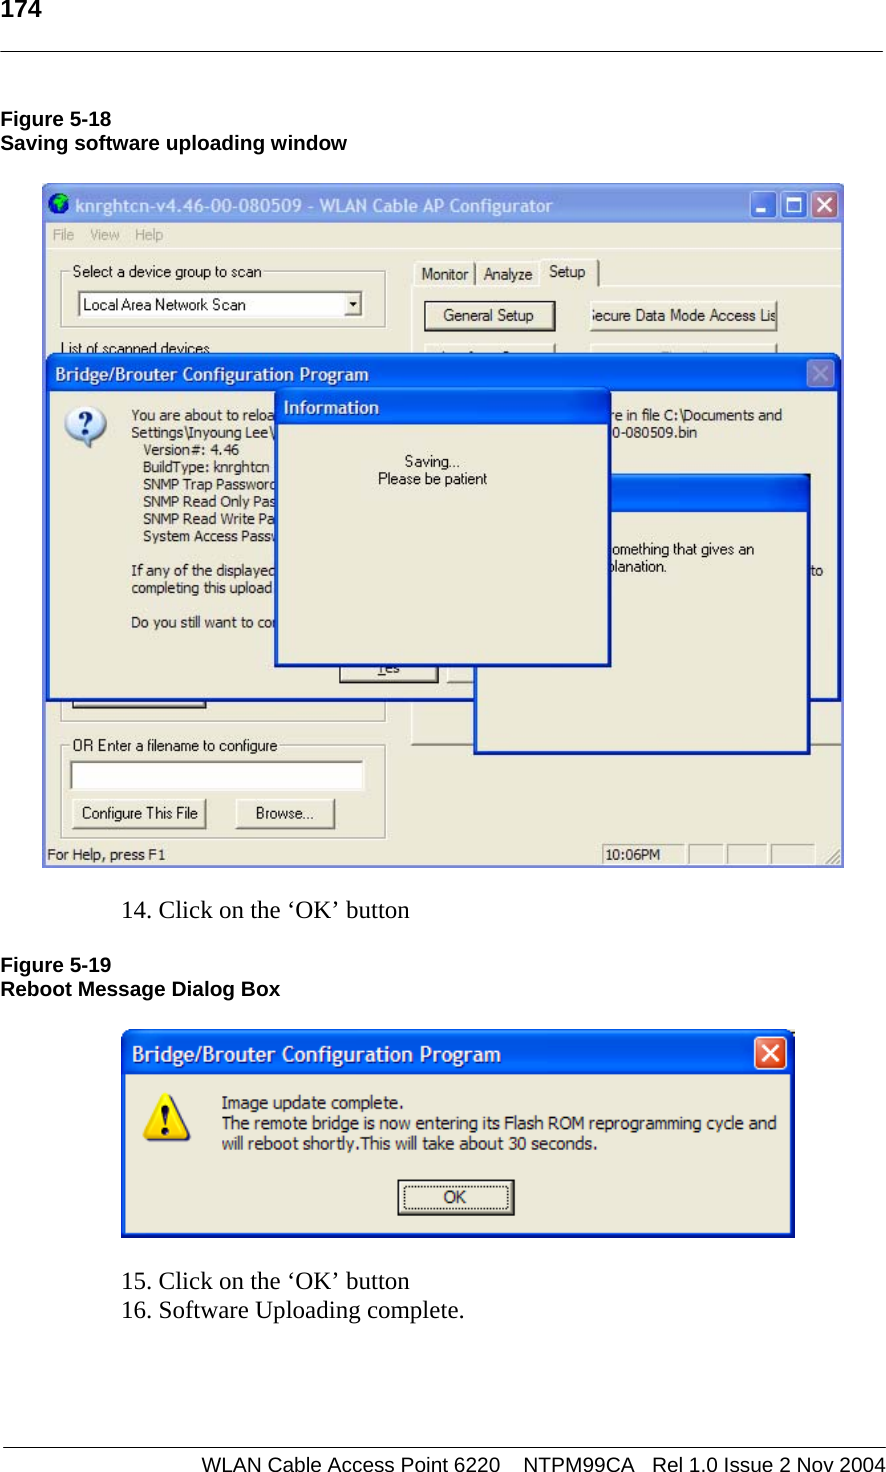   174    WLAN Cable Access Point 6220    NTPM99CA   Rel 1.0 Issue 2 Nov 2004 Figure 5-18 Saving software uploading window    14. Click on the ‘OK’ button  Figure 5-19 Reboot Message Dialog Box    15. Click on the ‘OK’ button 16. Software Uploading complete.    